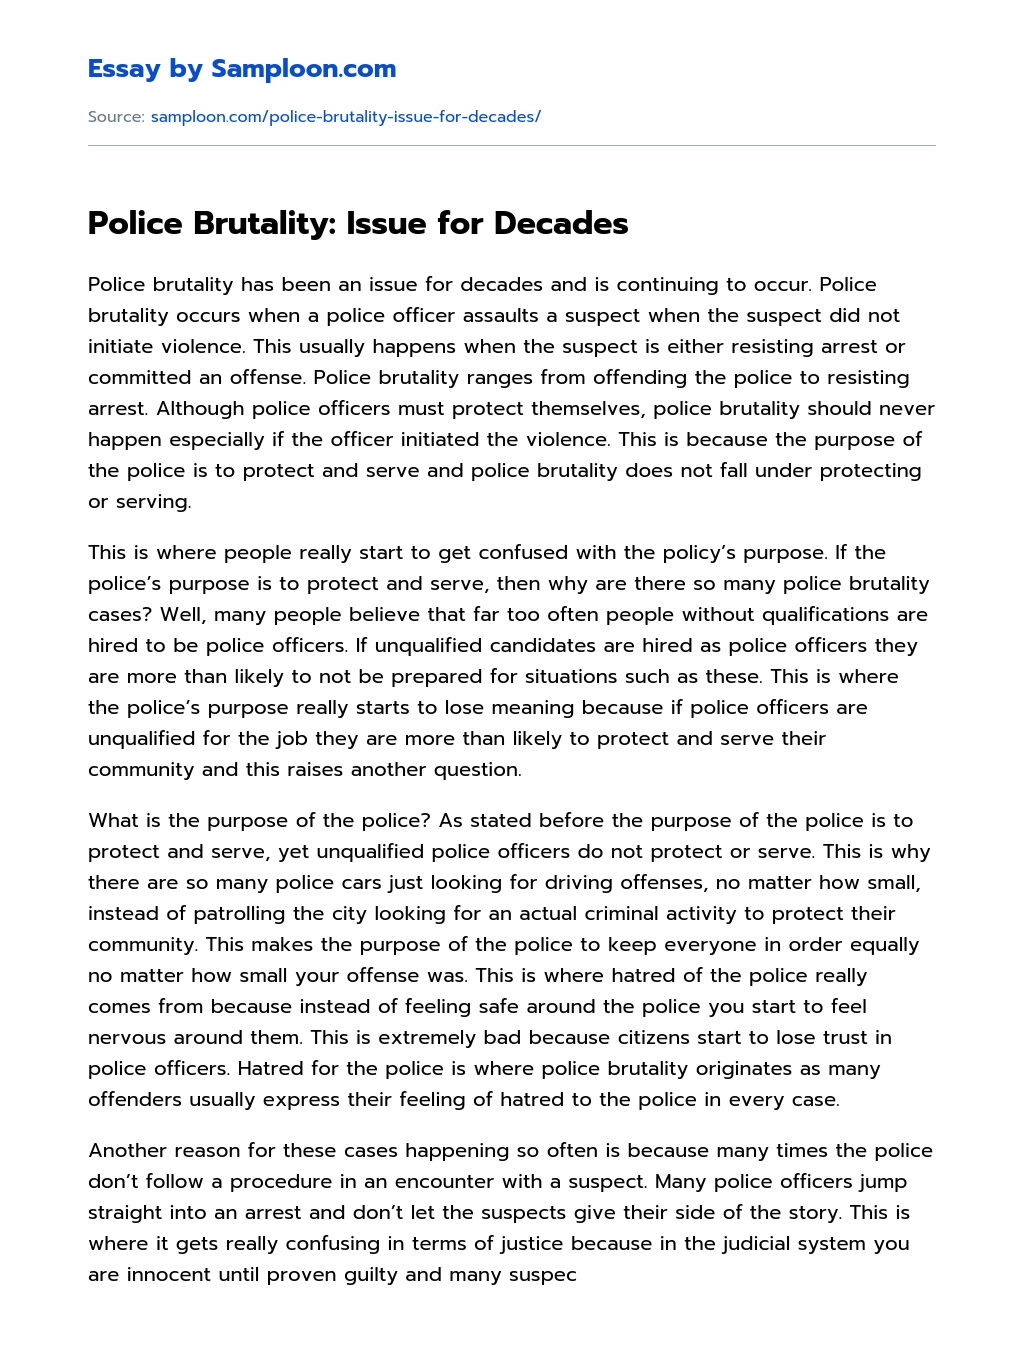 Police Brutality: Issue for Decades essay